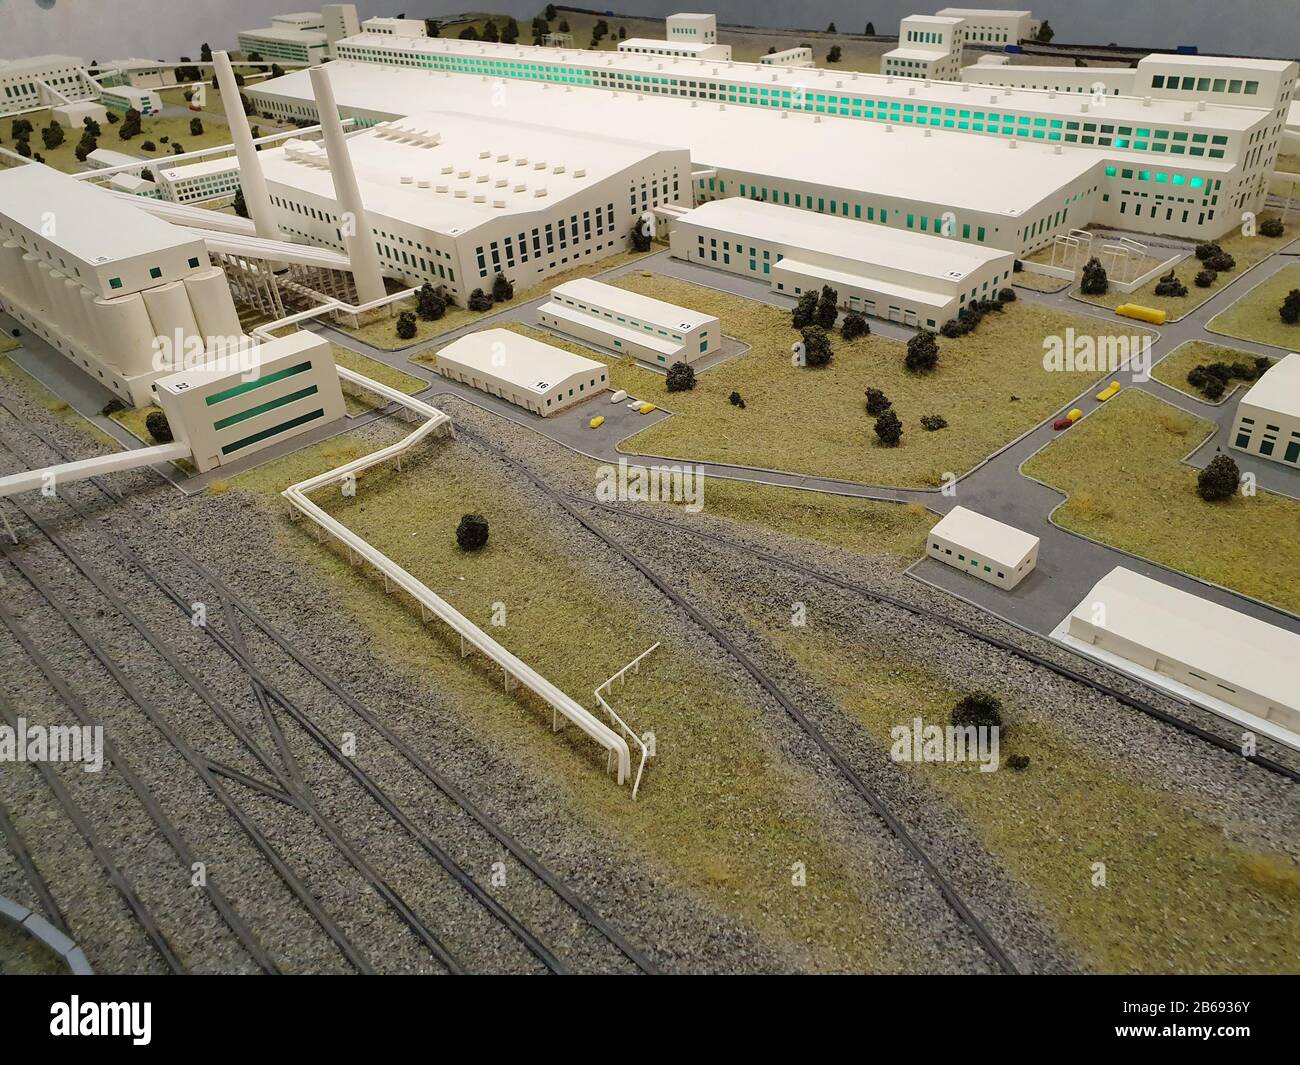 A model of a large factory or industrial complex. The copy is made of plastic and is very similar to the original buildings. Stock Photo